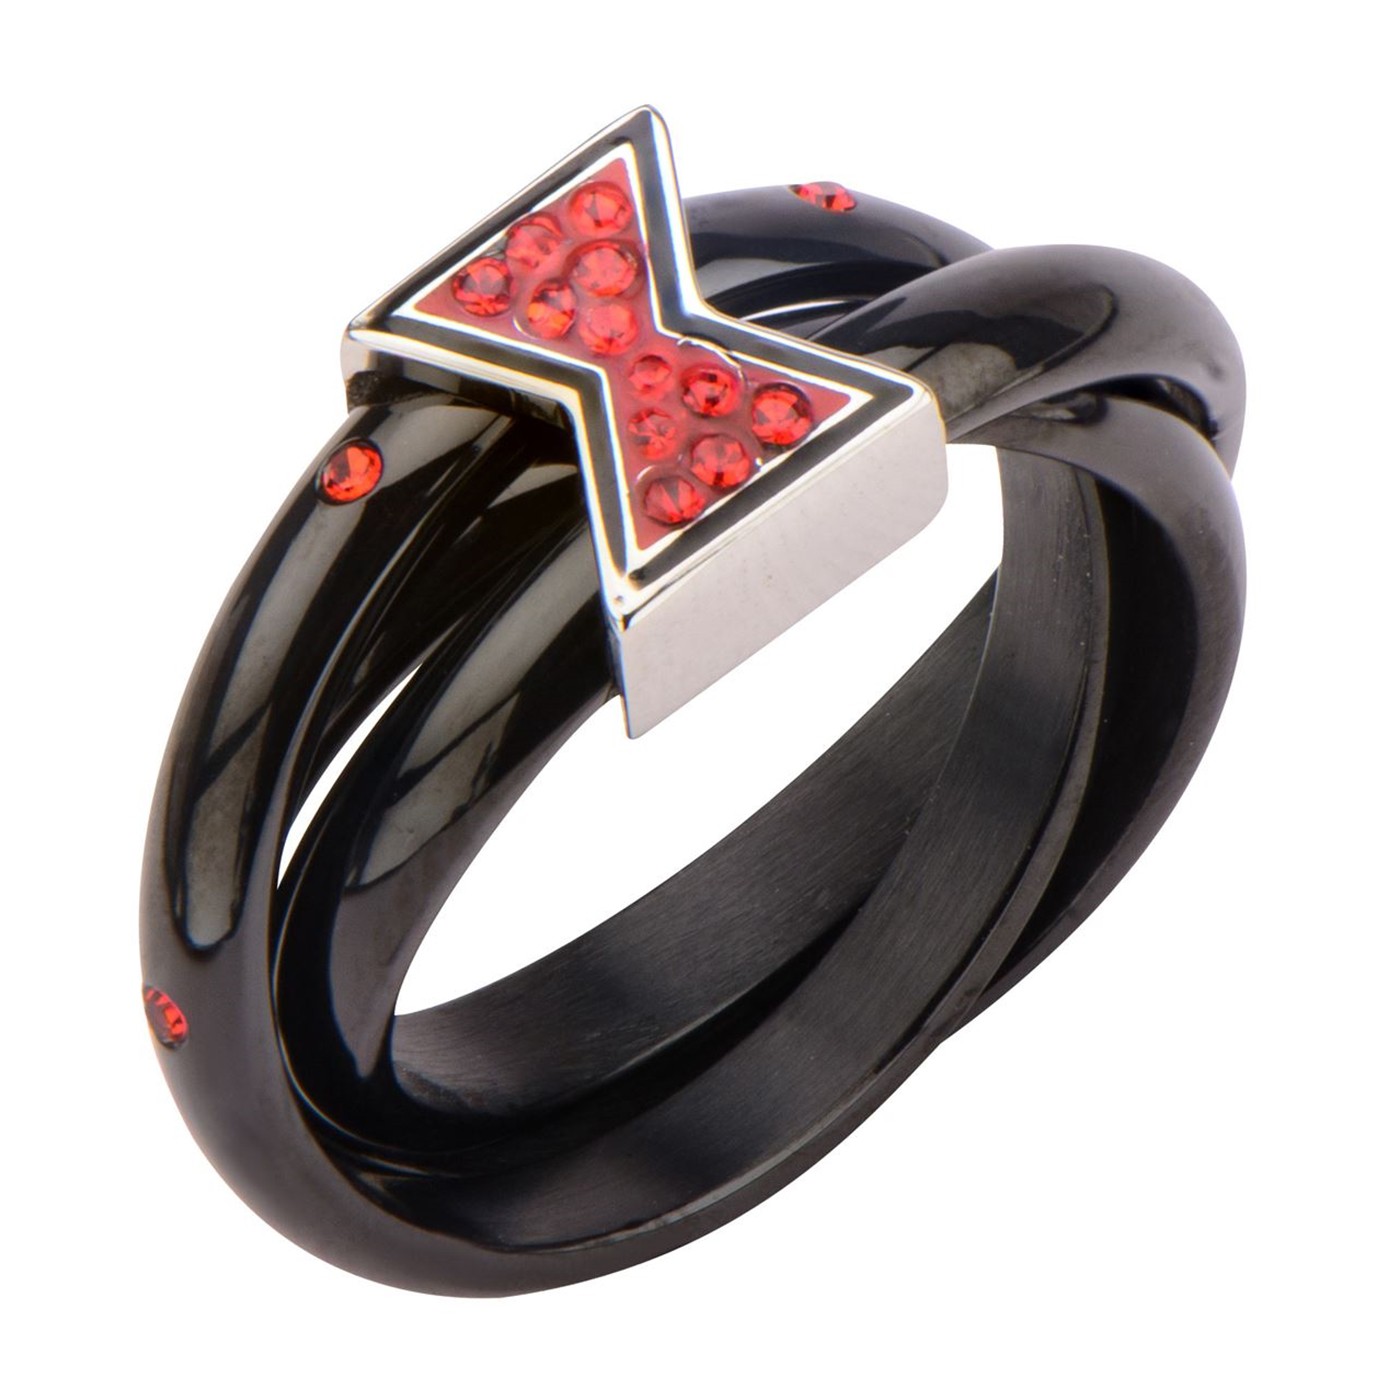 Black Widow Symbol Ring with Red Gems